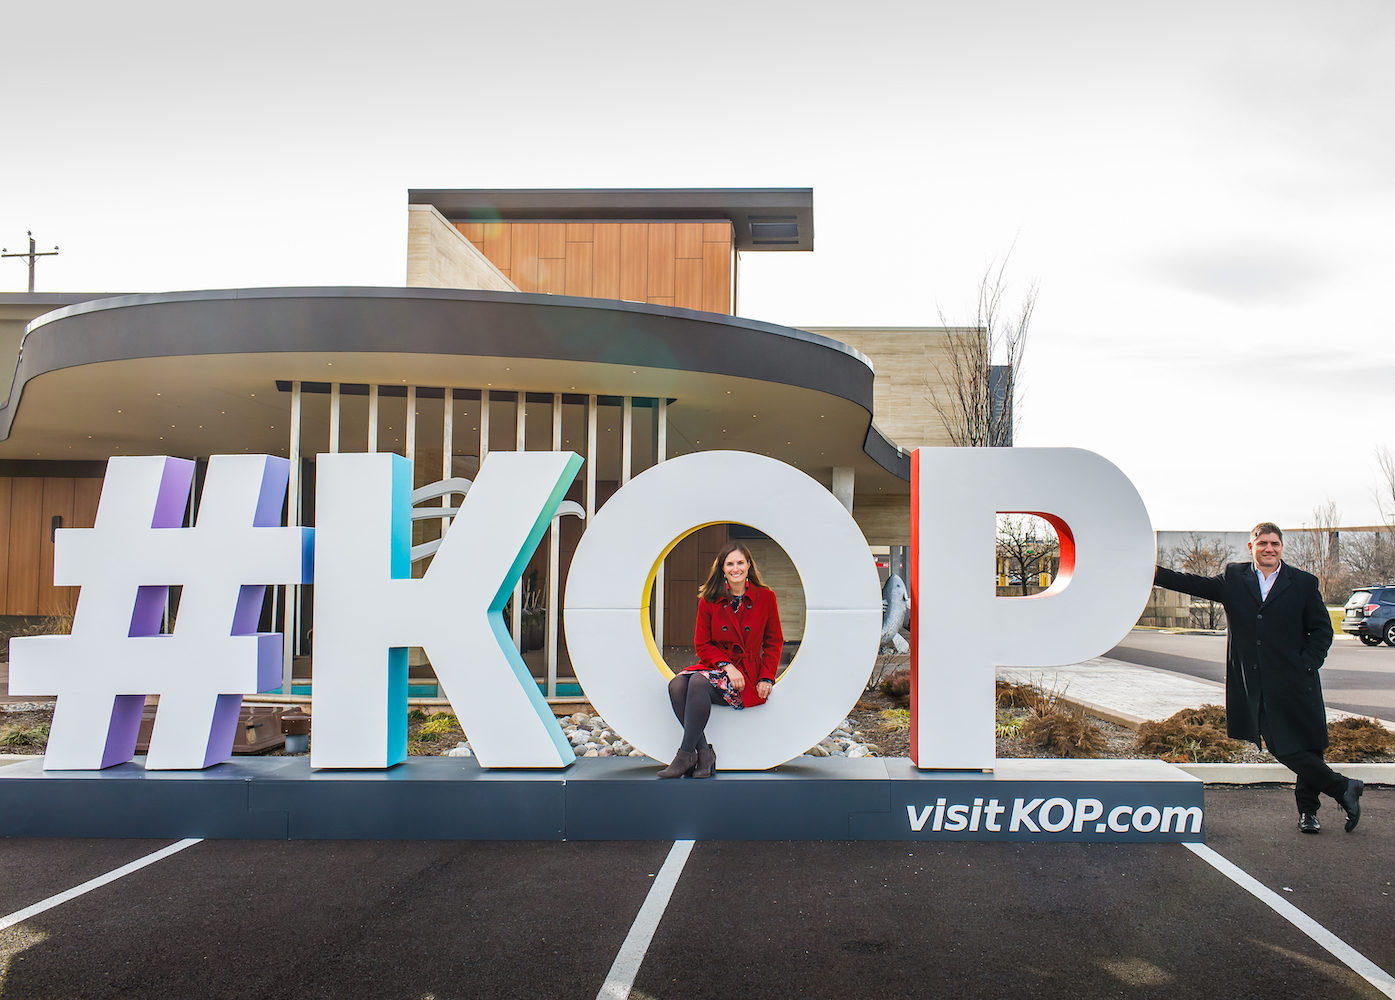 Man and woman posing by giant #KOP letters